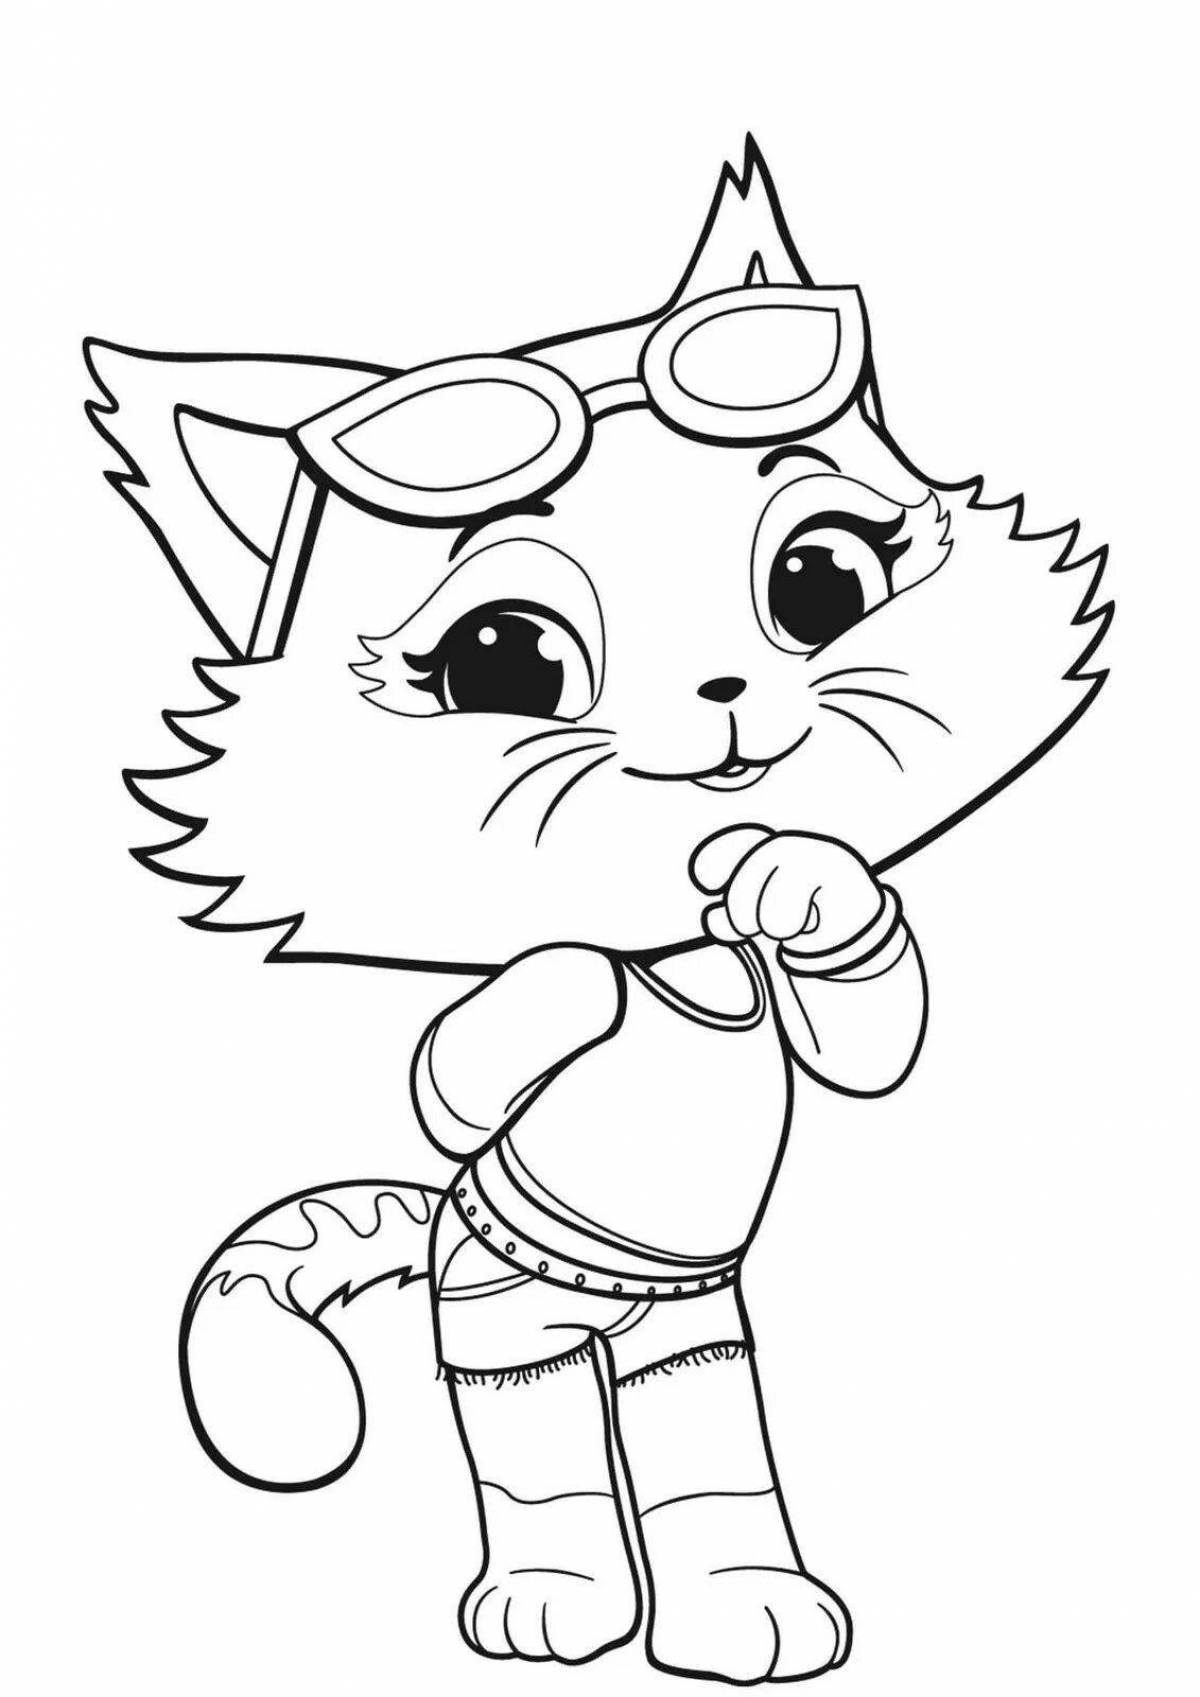 Fluffy cat coloring pages